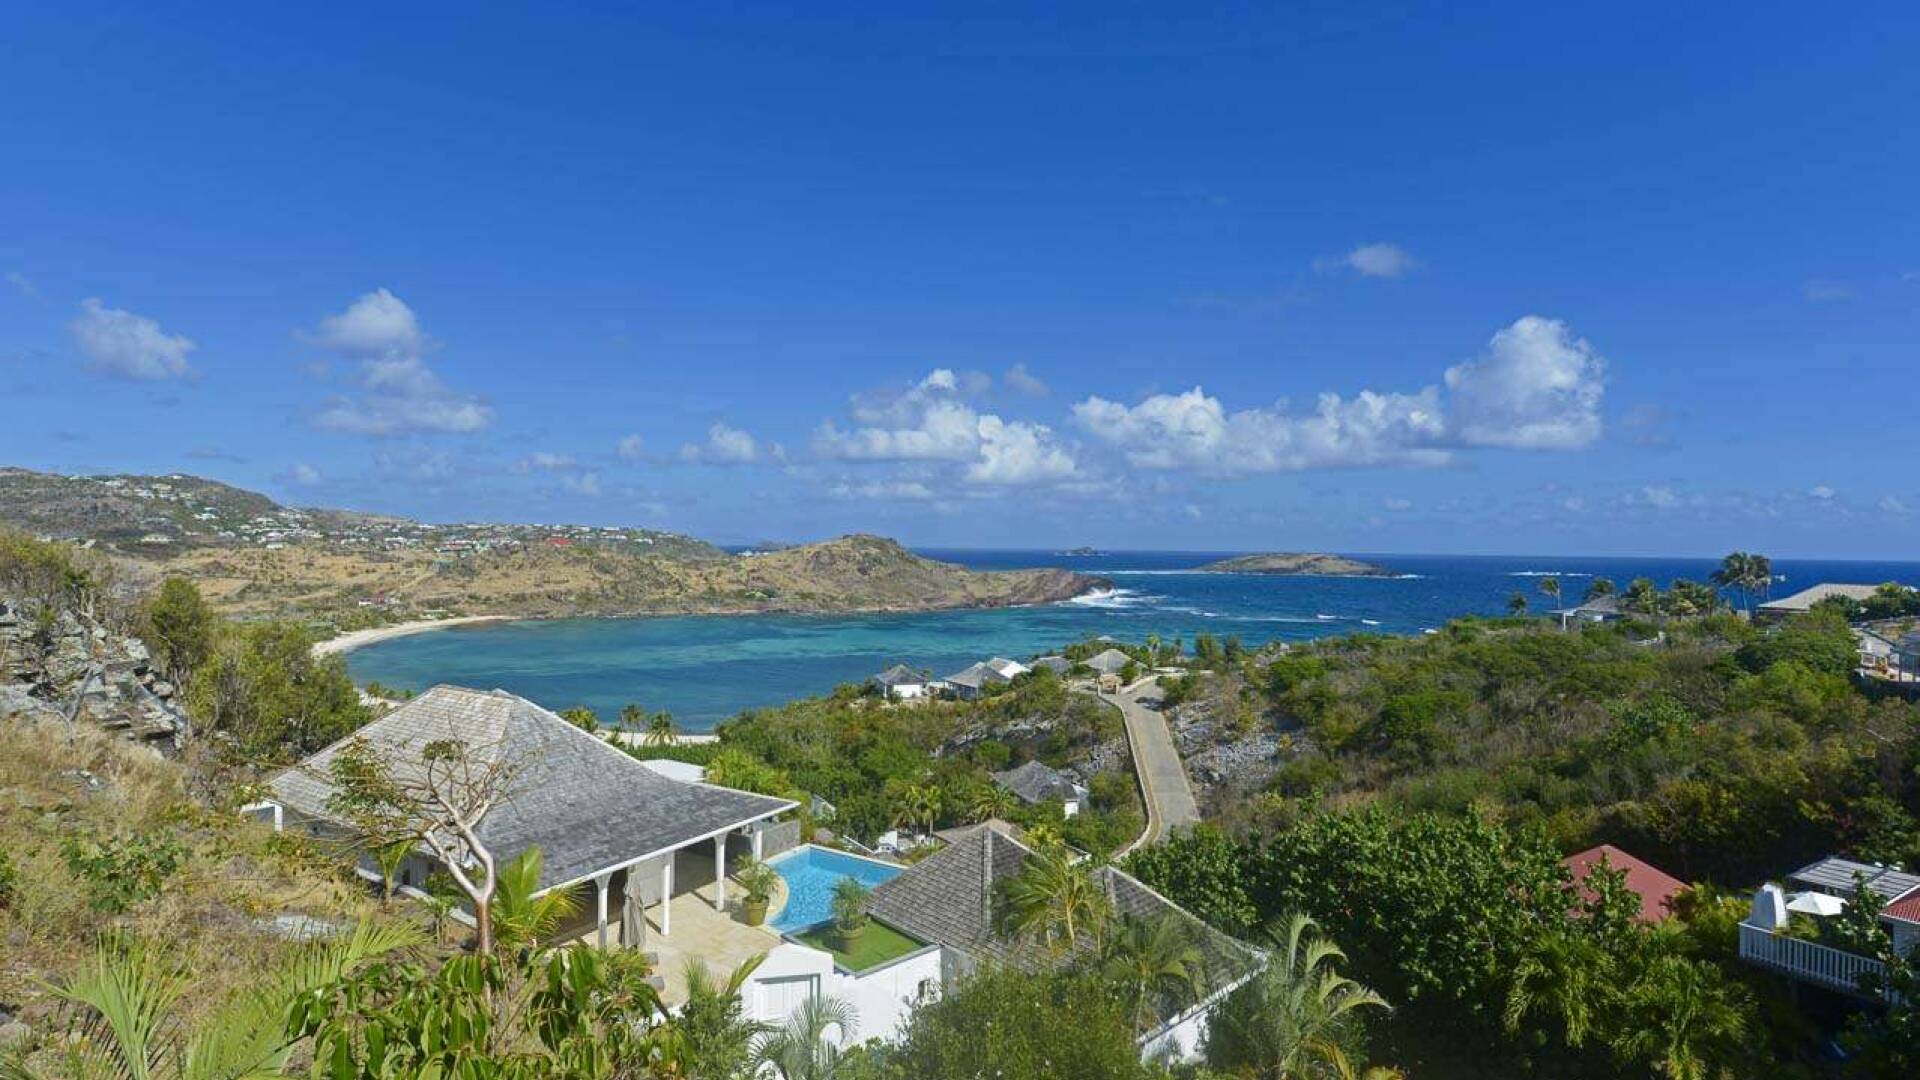 The view from WV LAR, Petit Cul de Sac, St. Barthelemy